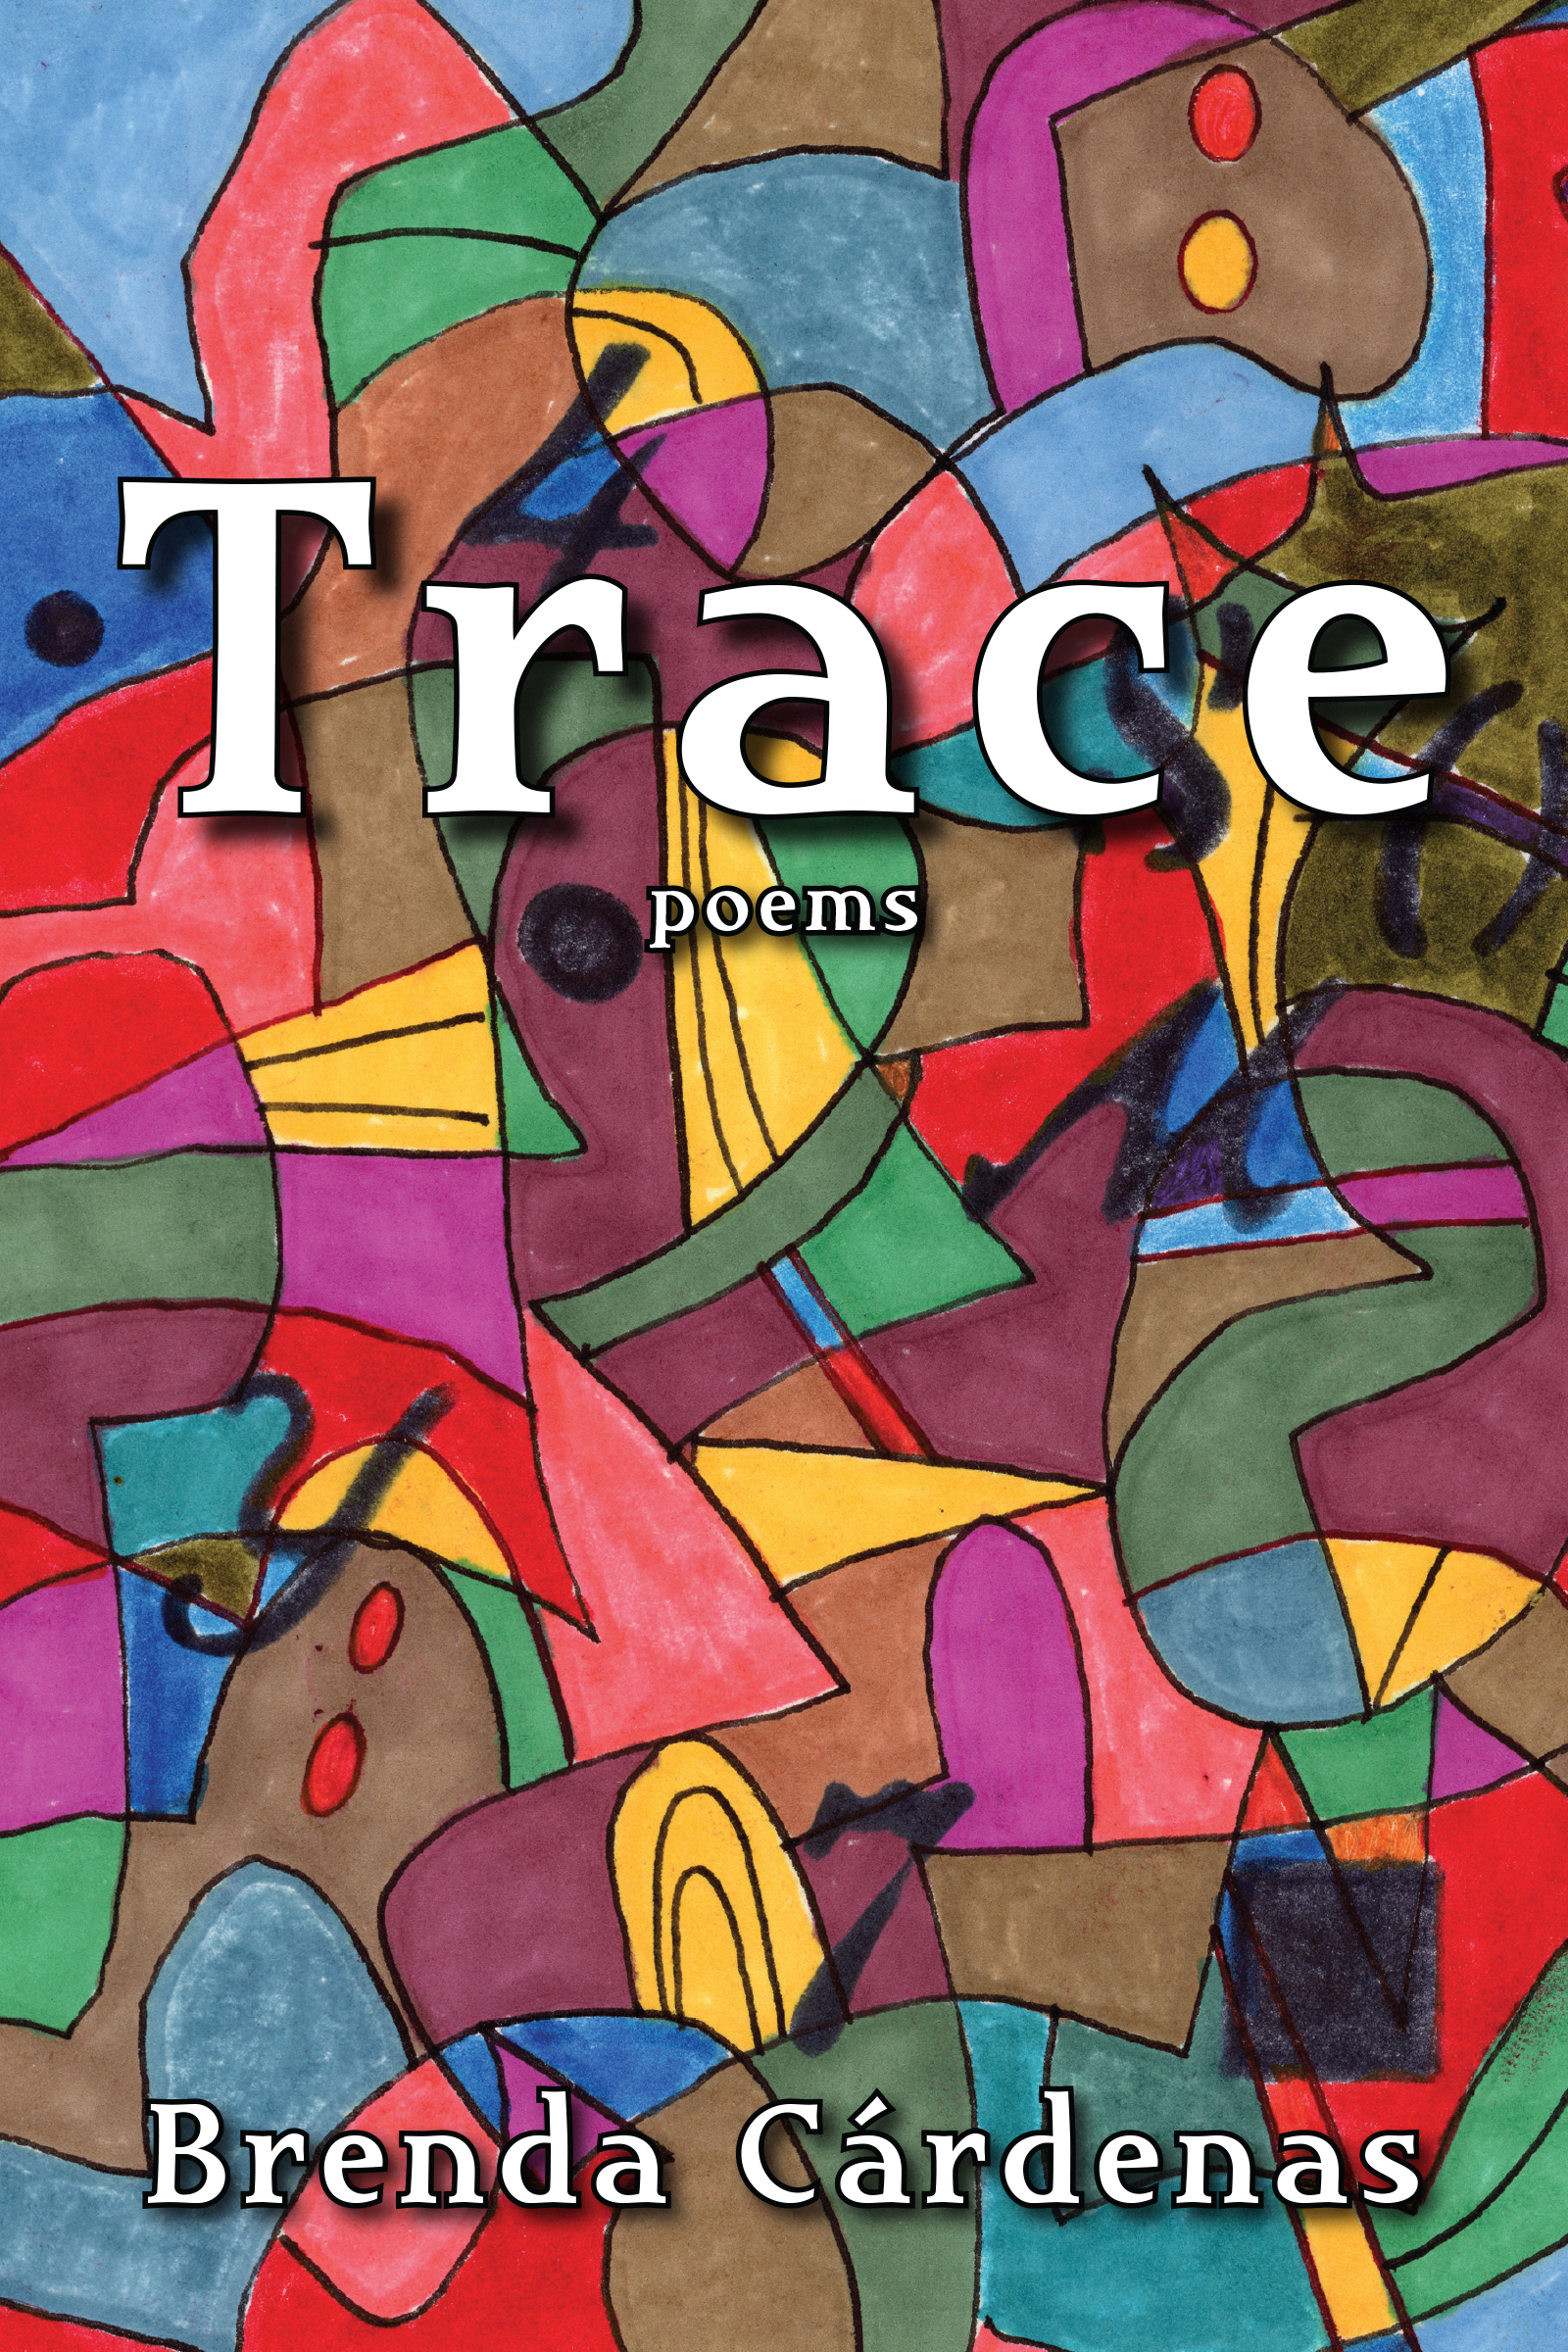 An abstract collection of different color shapes and bodies with the title trace: poems by Brenda Cardenas